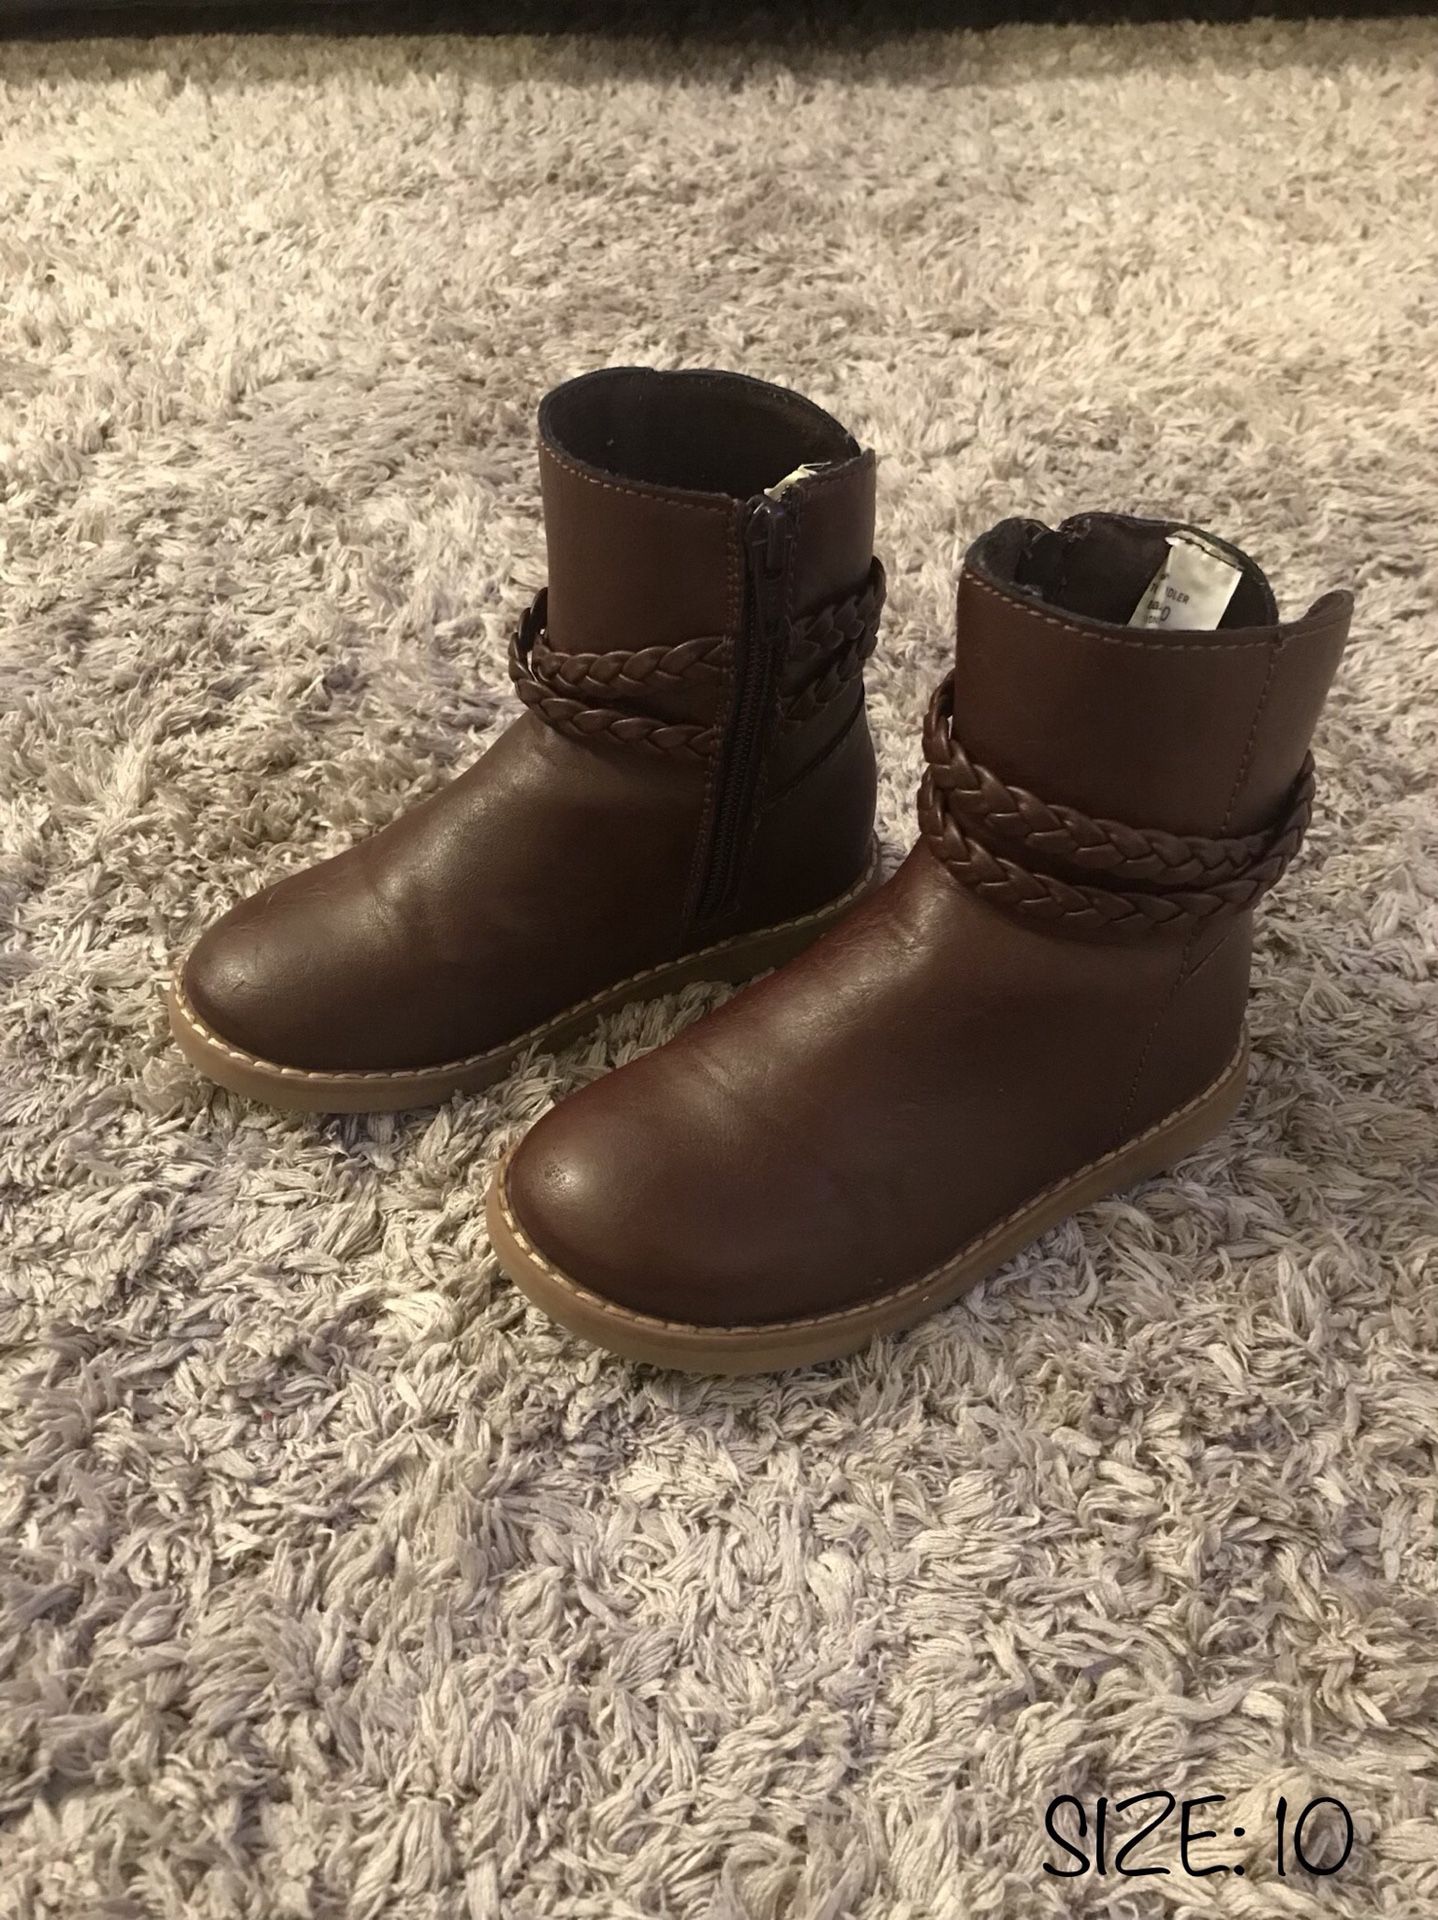 LIKE NEW‼️ BABY GAP BROWN BOOTS - SIZE 10 - TODDLER BABY GIRL